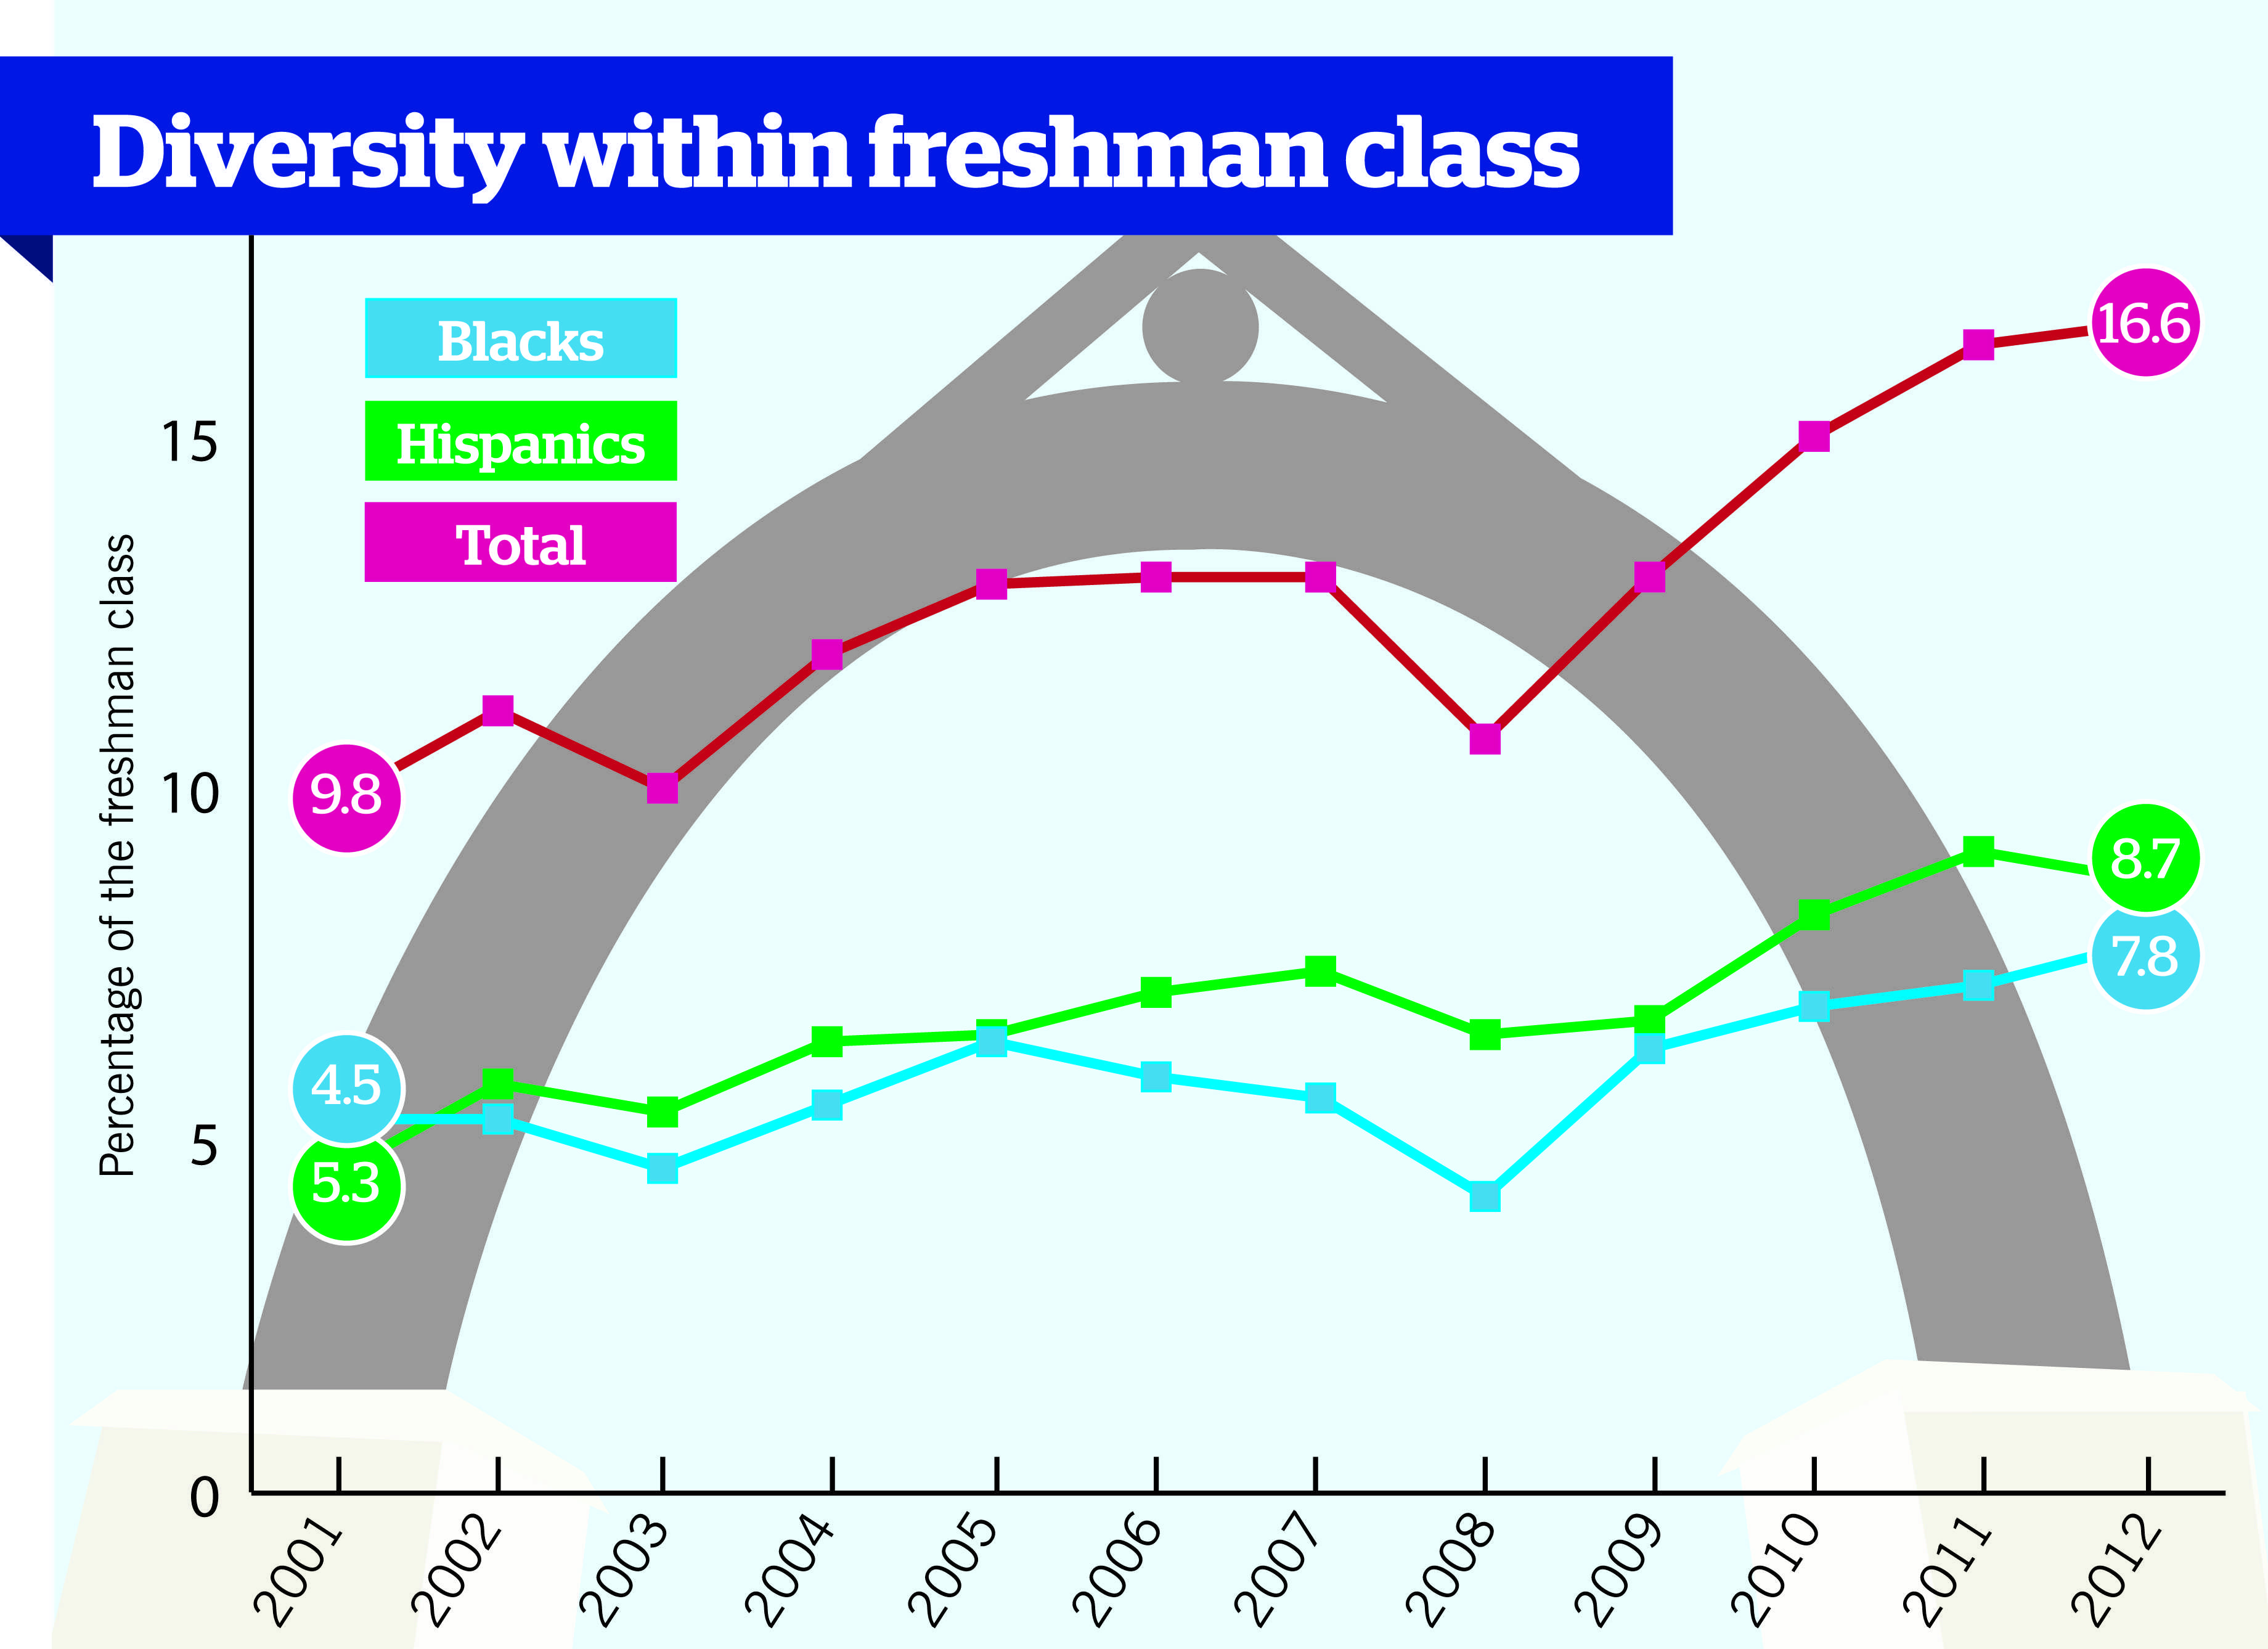 For+Class+of+2016%2C+percentage+of+black+students+highest+in+23+years